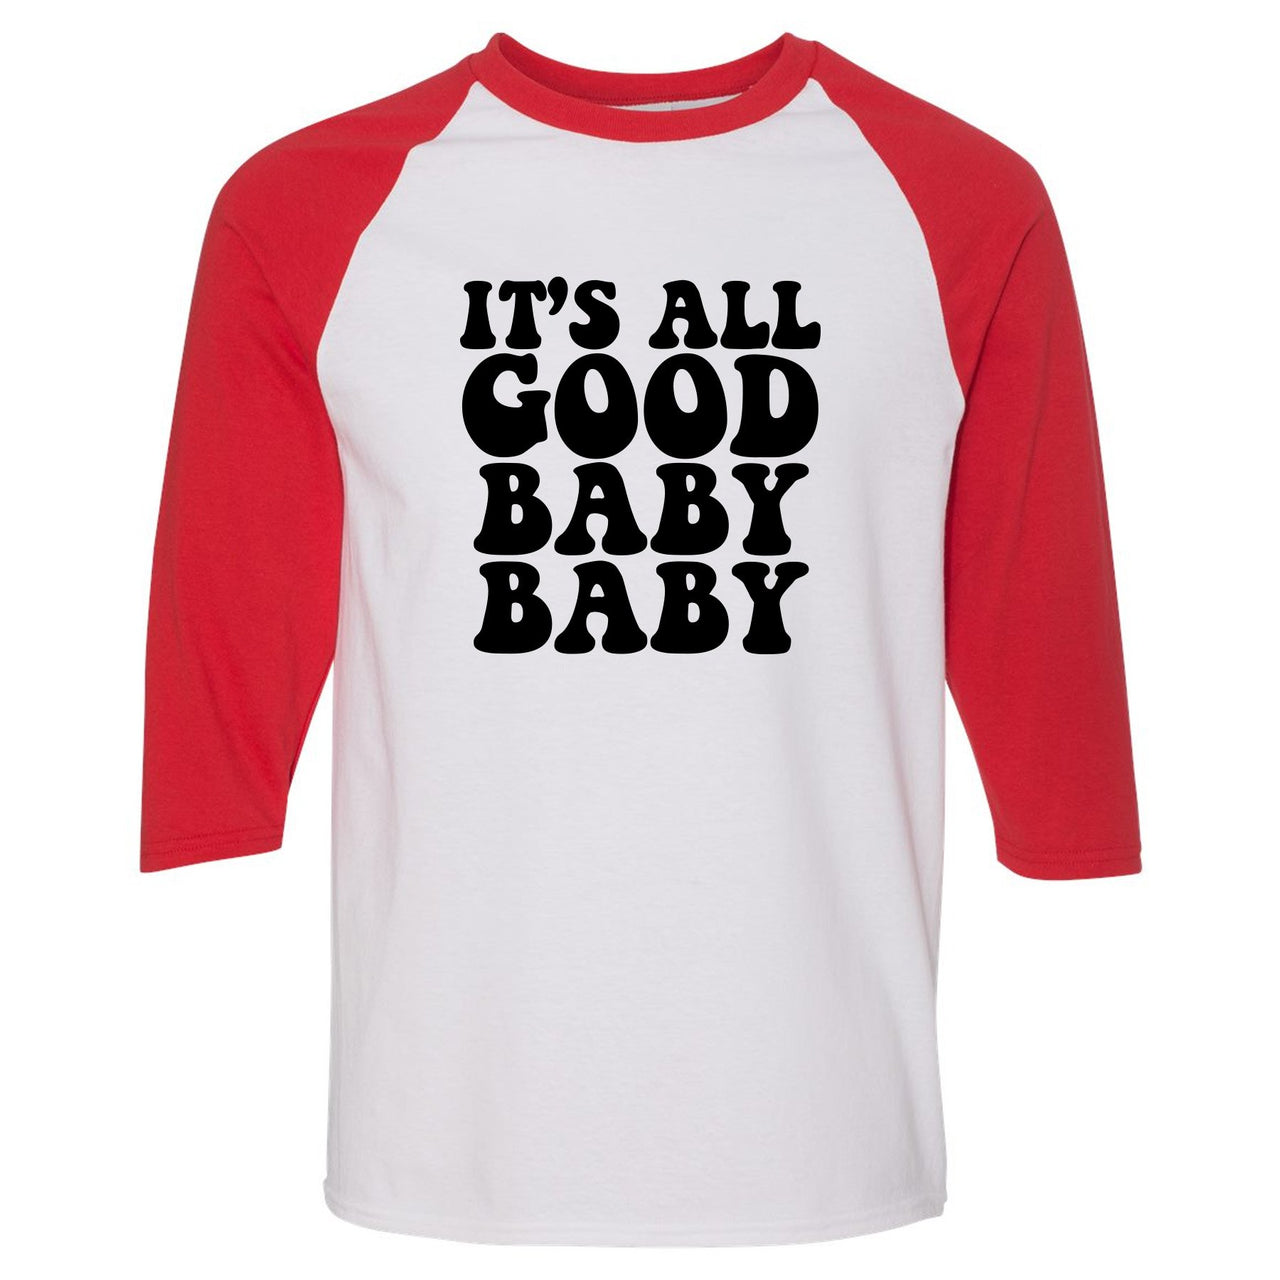 Reflections of a Champion 7s Raglan T Shirt | It's All Good Baby Baby, White and Red